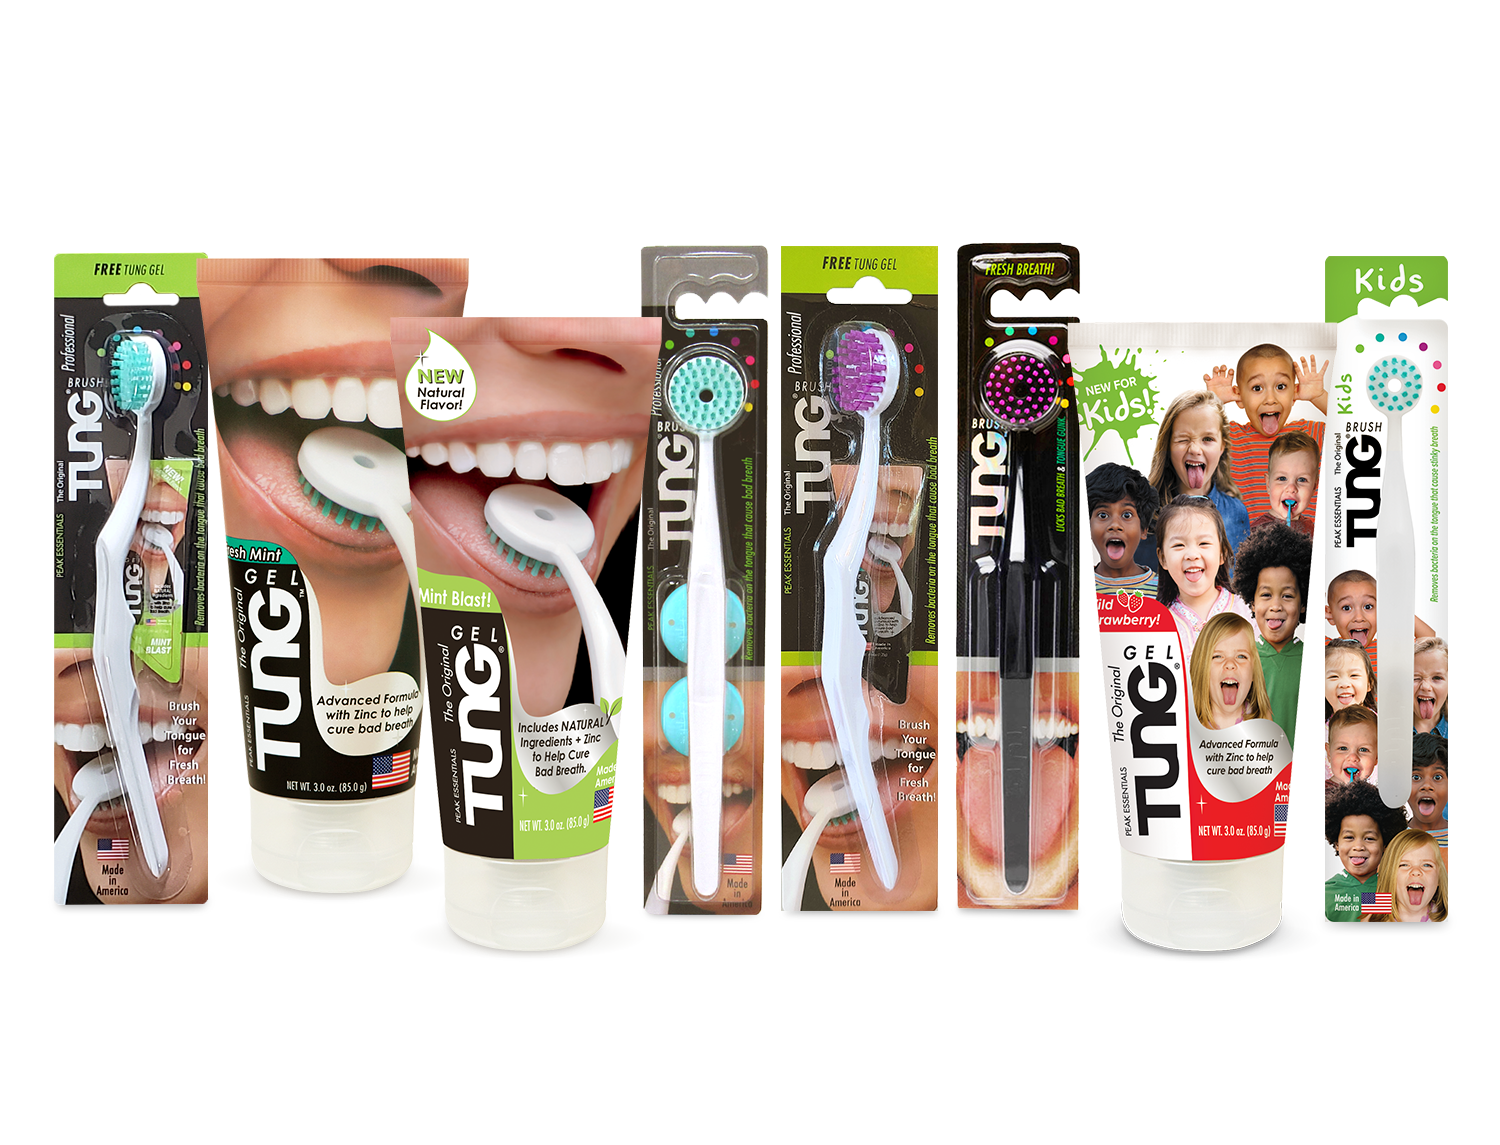 Entire product line of TUNG tongue brushes and gels, including the new kid's tongue cleaning products